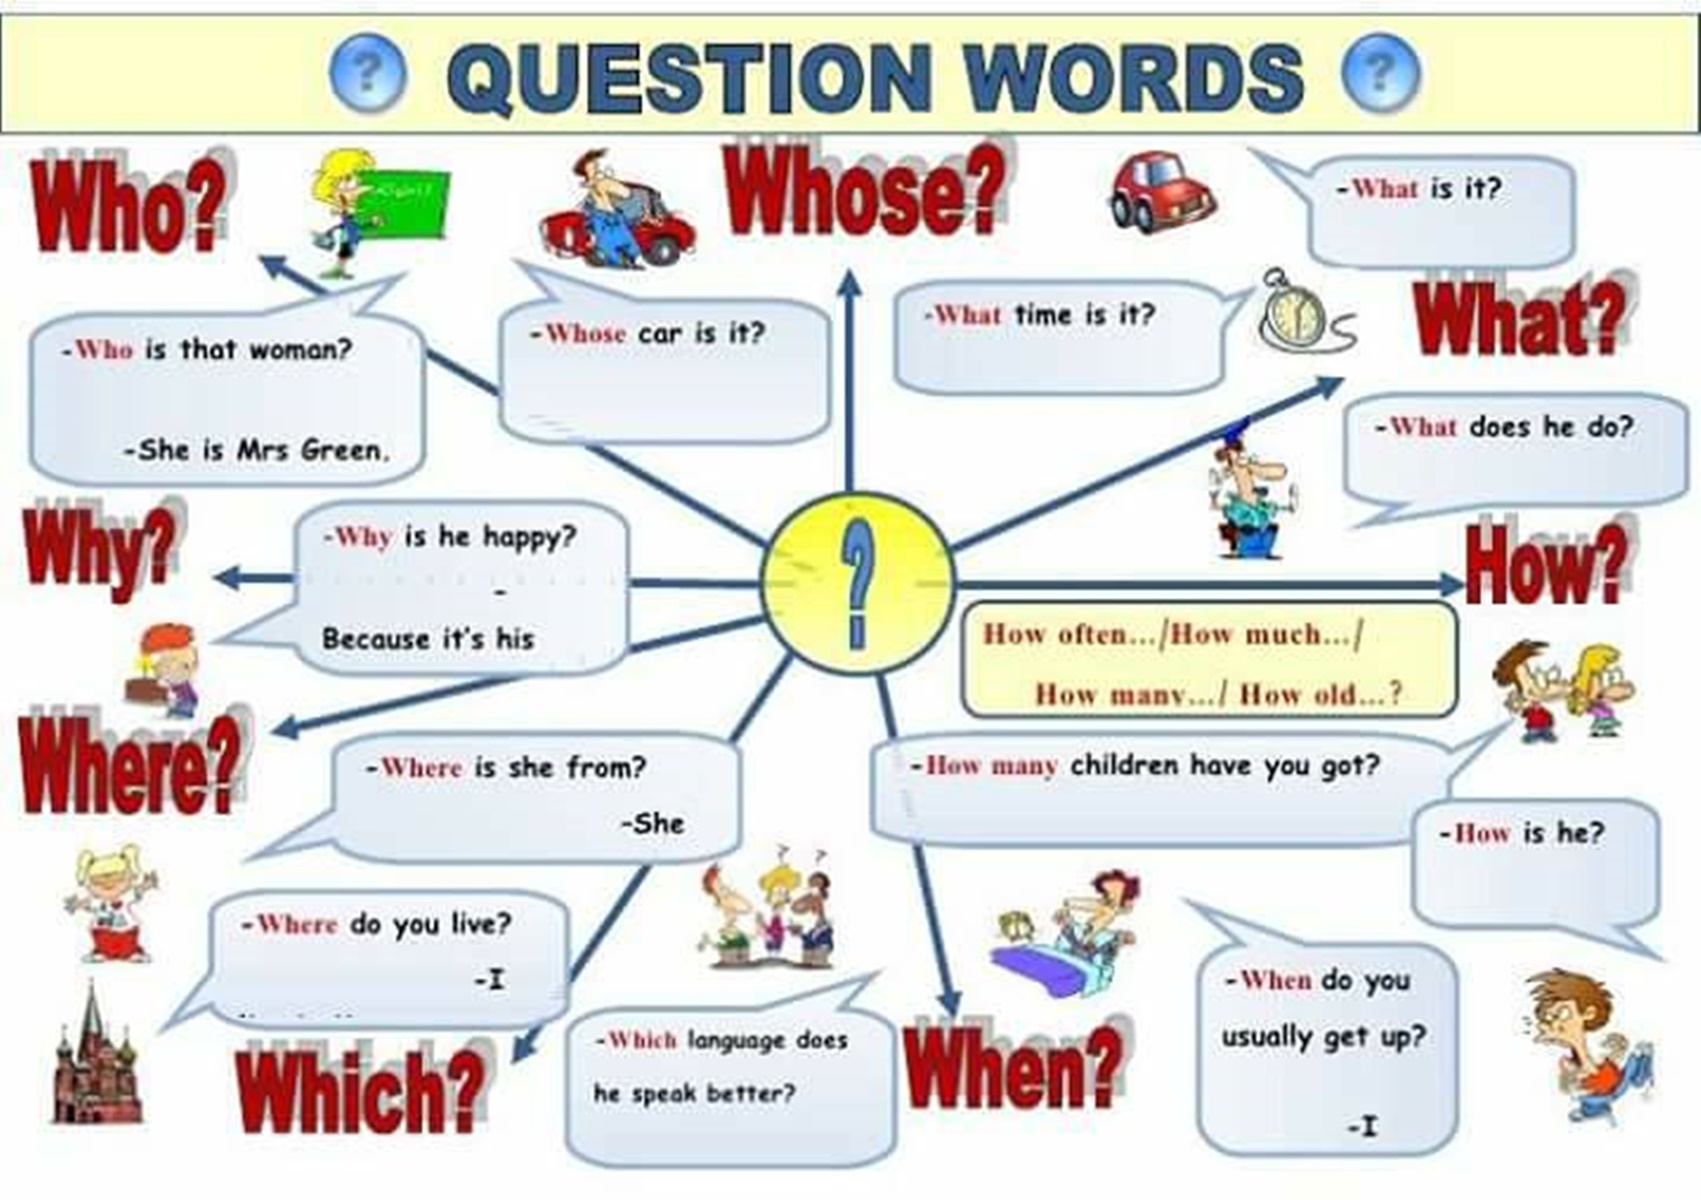 Question Words in English.